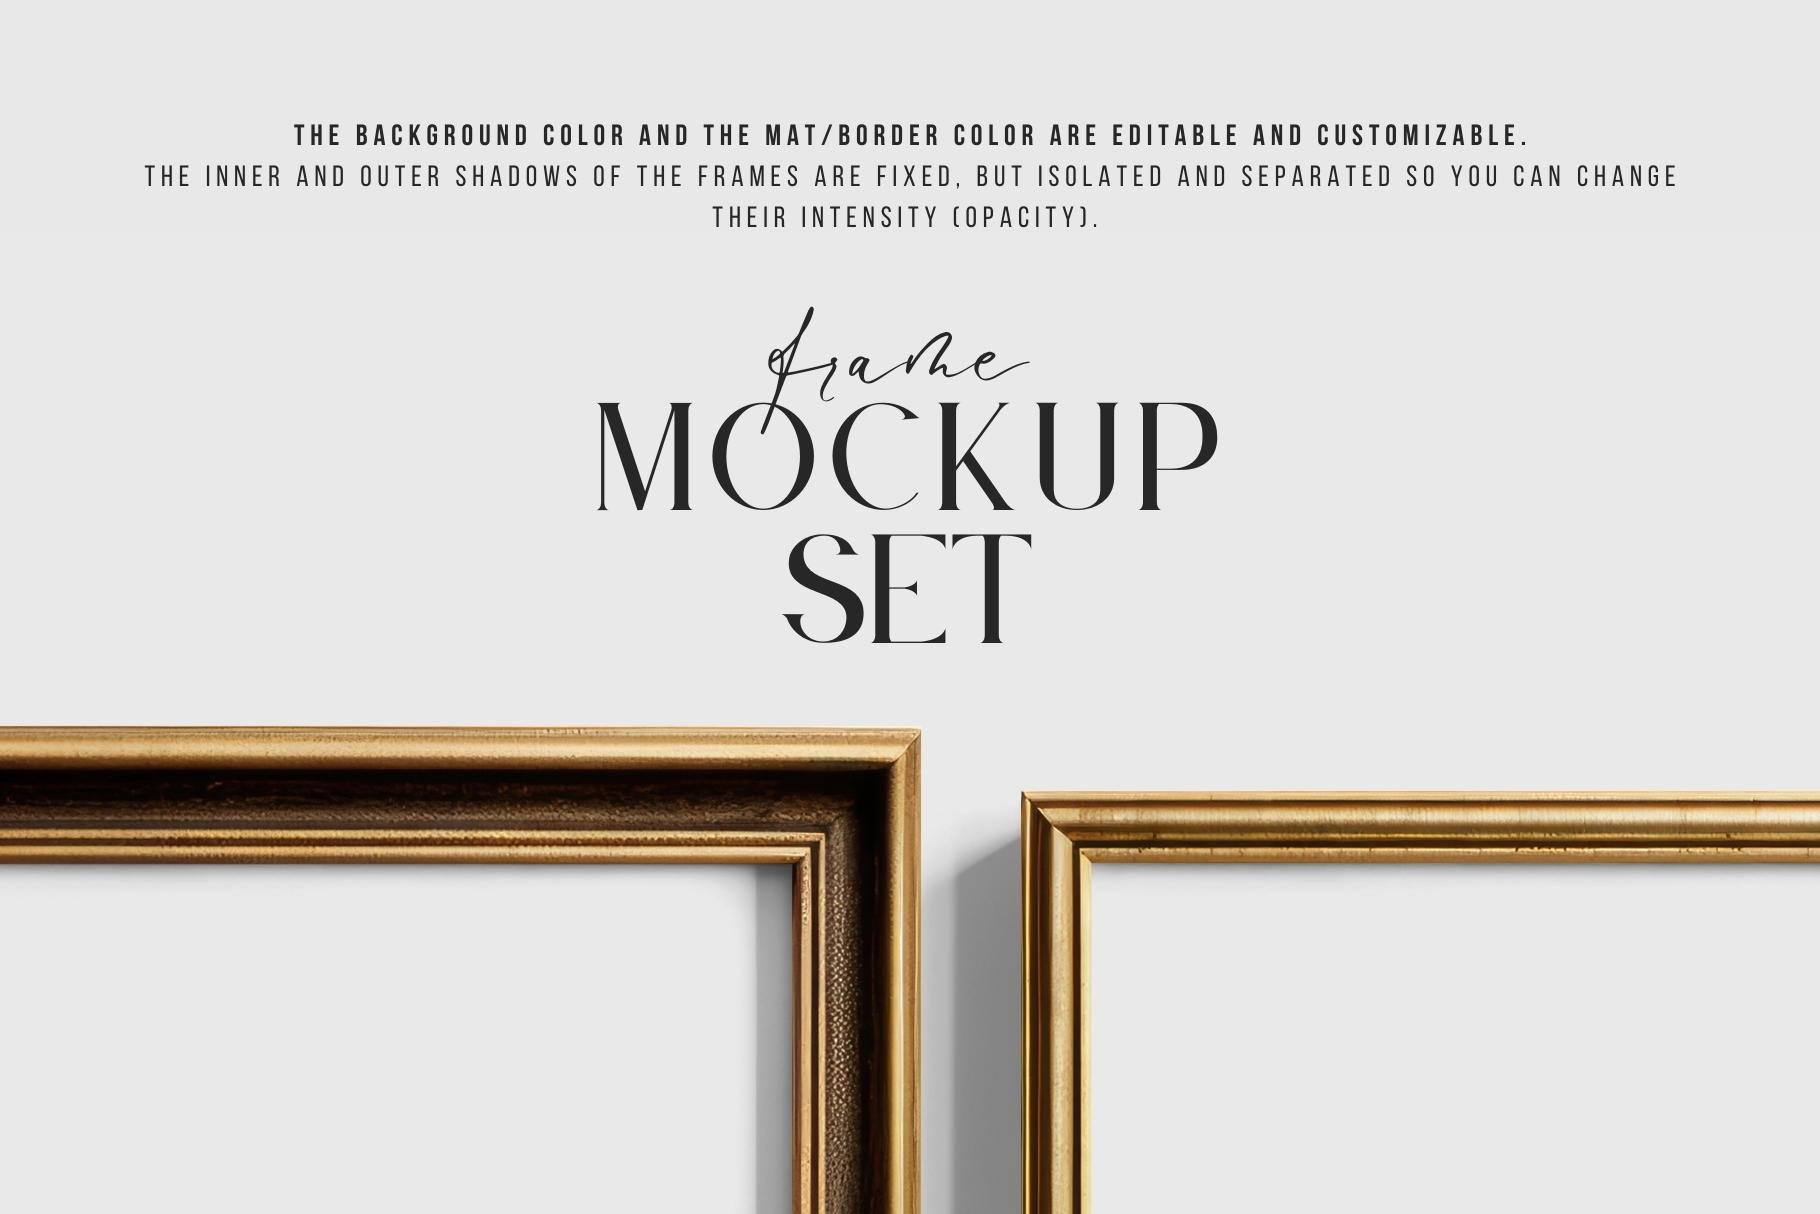 frames for photoshop psd free download